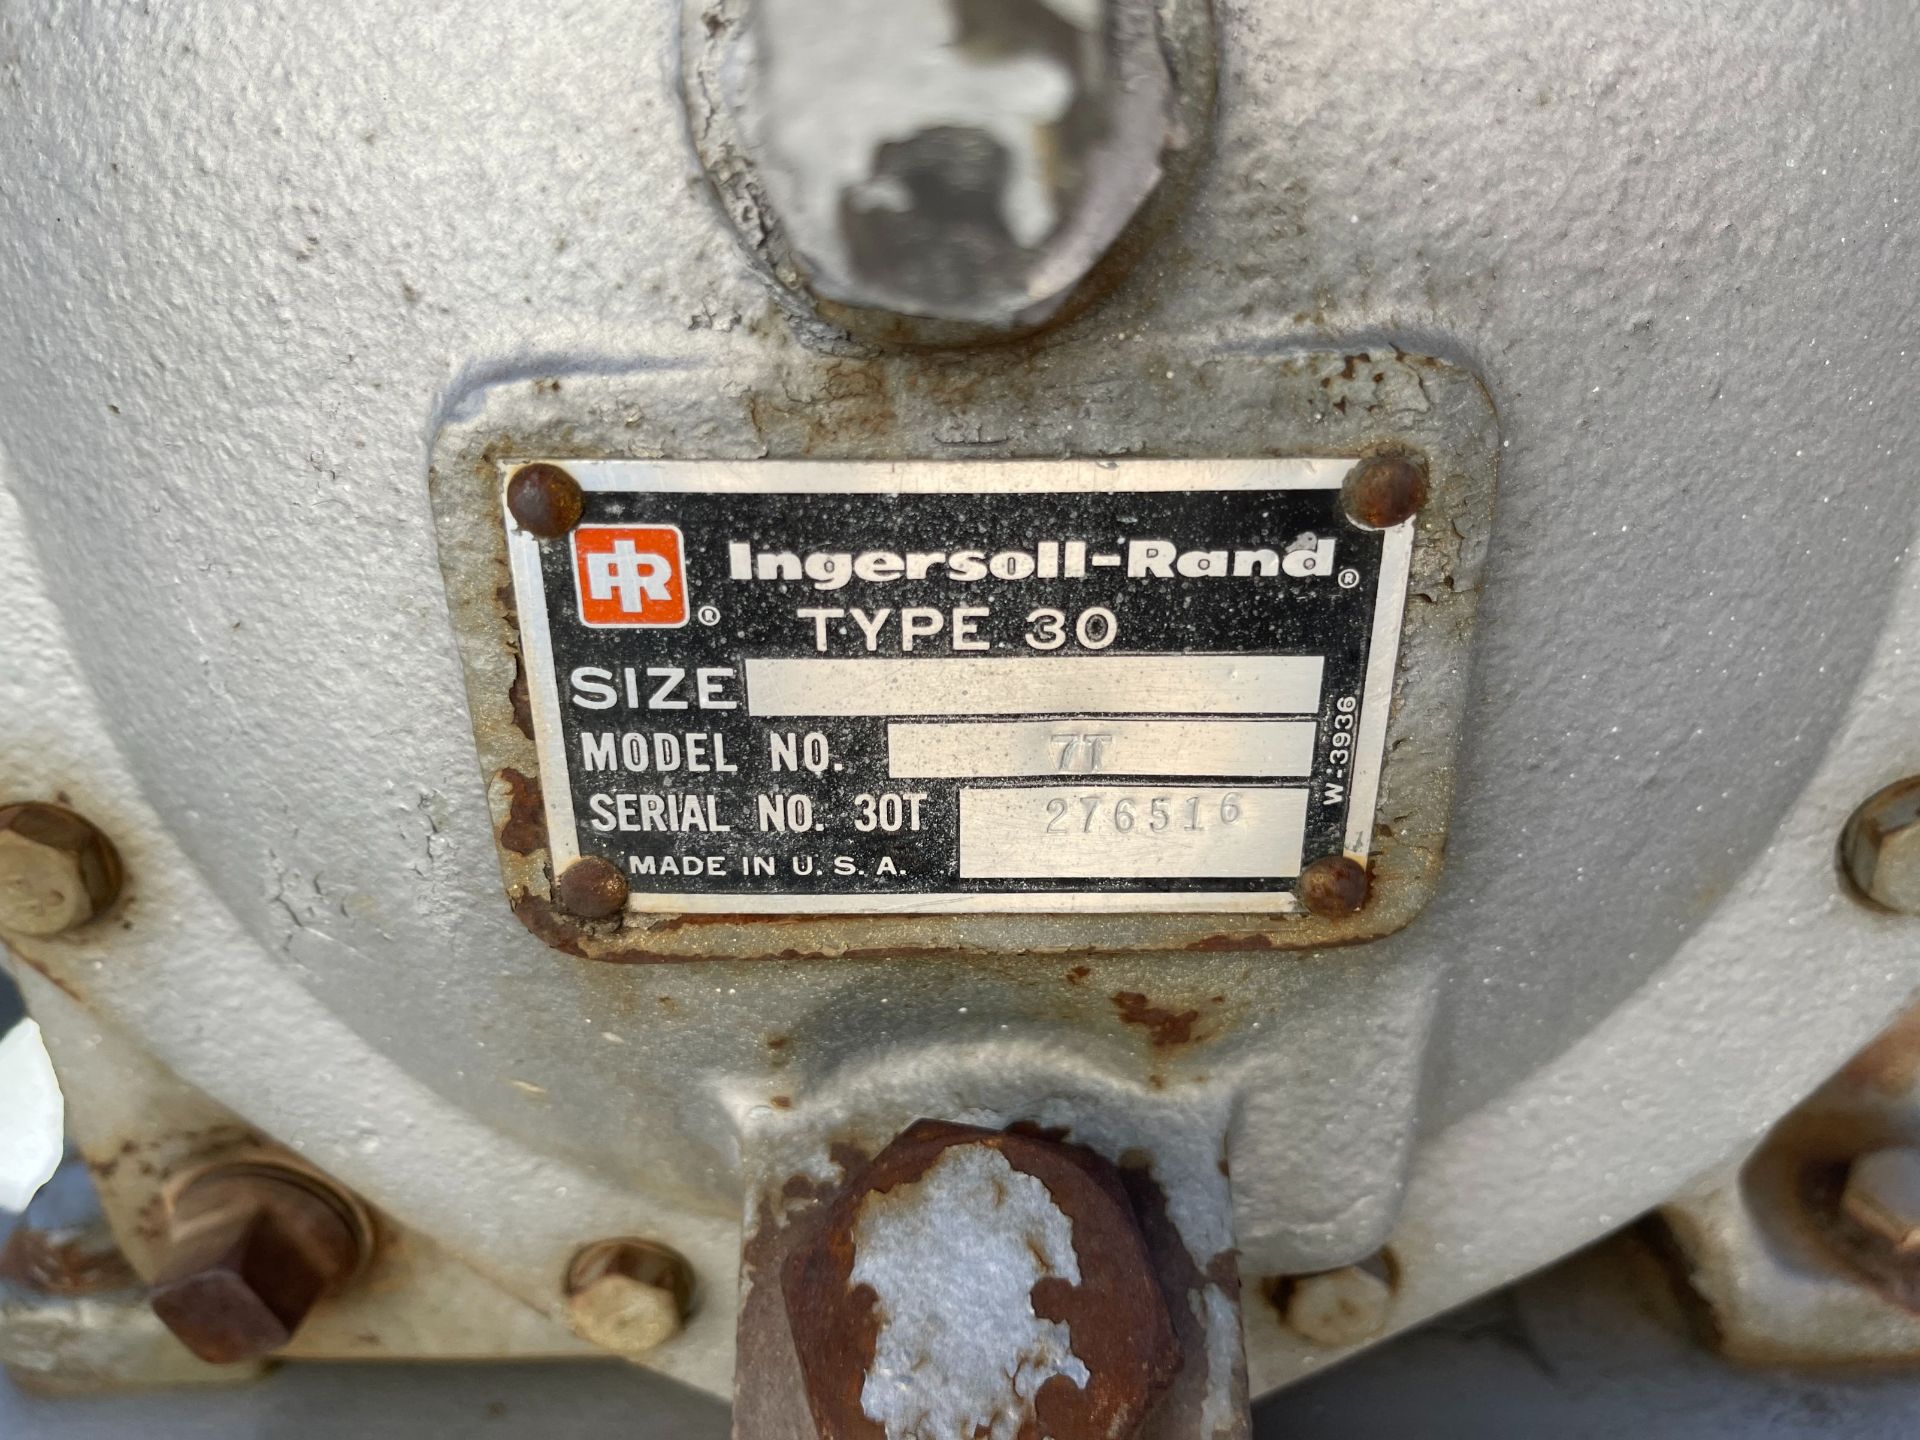 INGERSOLL-RAND TYPE 30 AIR COMPRESSOR, MODEL 7T, S/N 276516 - Image 2 of 2